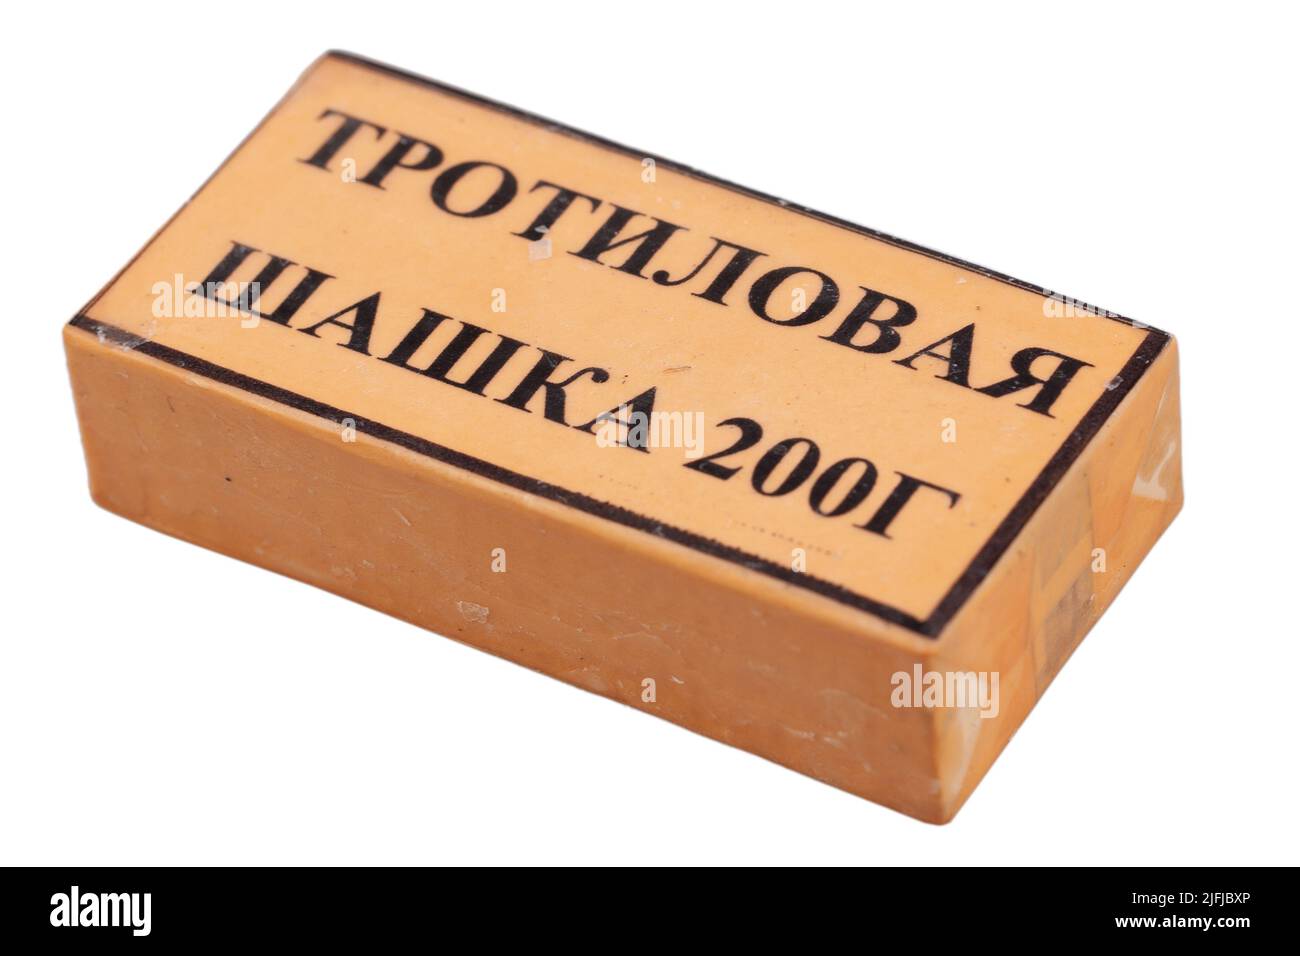 TNT block 200 gram. russian/soviet type isolated on white background. Inscription in russian on the photo: 'TNT block 200 grams' Stock Photo